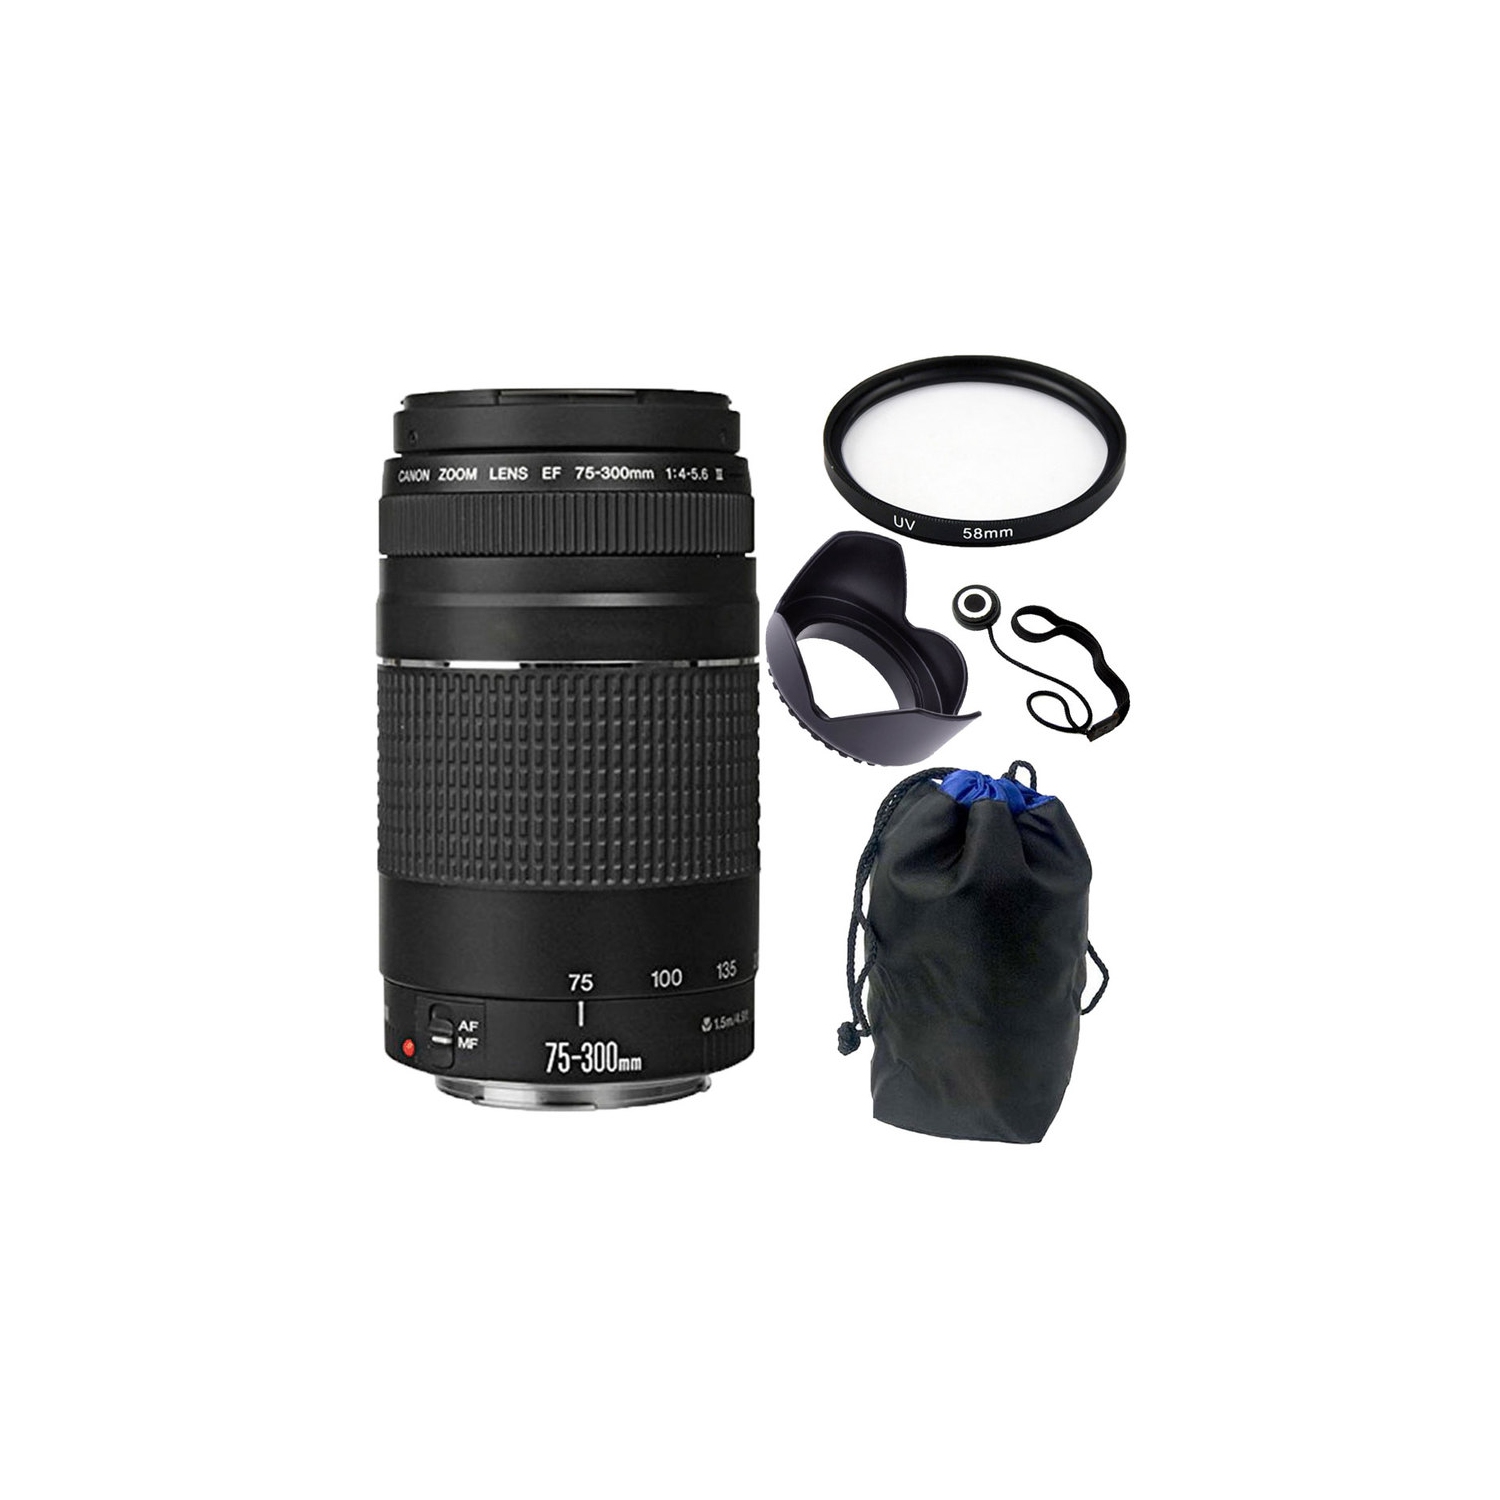 Canon EF 75-300mm f/4.0-5.6 III Lens Bundle for Canon T5 T6 T6i 70D 80D 5D Mark